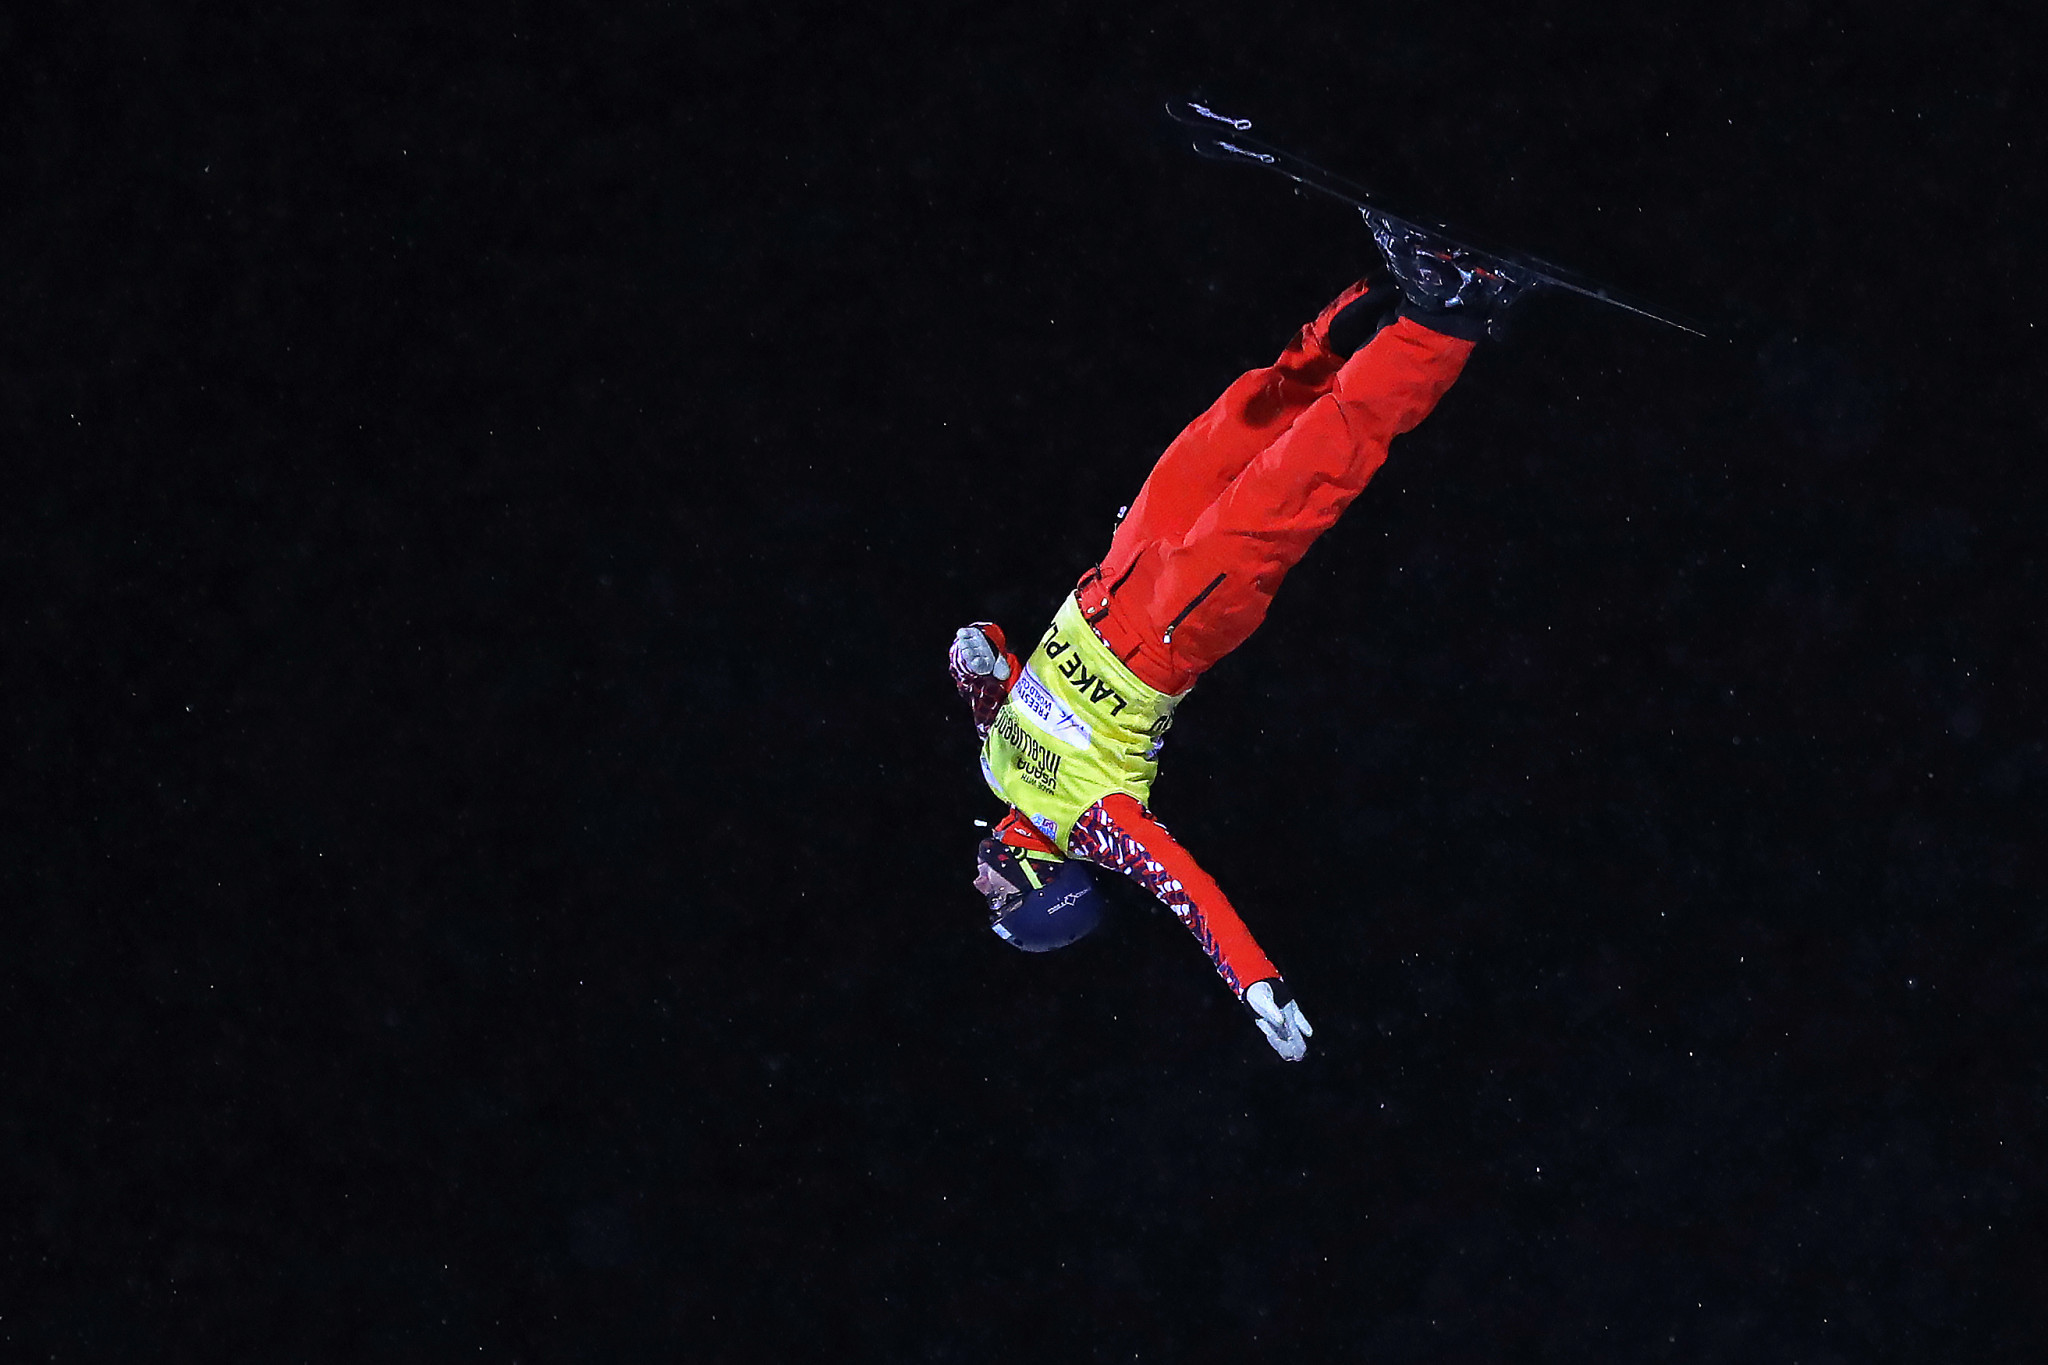 Russian Ski Federation win mixed team aerials gold as Almaty World Championships end